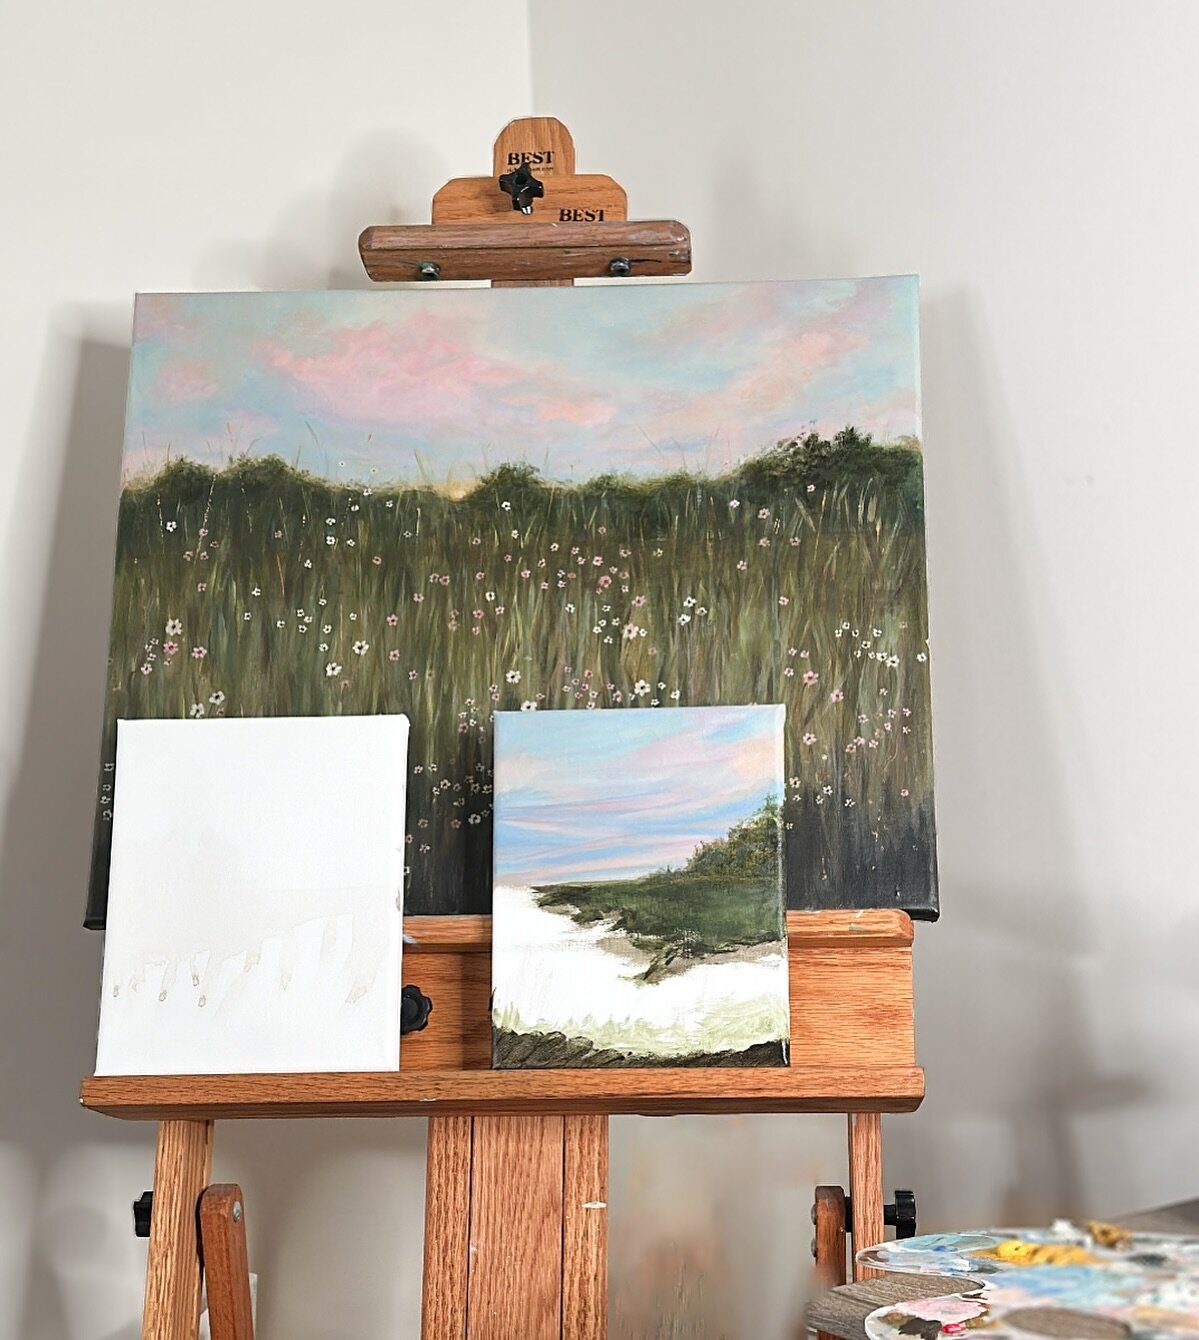 On the easel: A new collection of green grass and skies that sing of sunshine 🎶🌞🌳 This collection will be another small one with four total paintings. 

I will be sharing bits and pieces of its evolution in stories but I may be a bit quieter on he